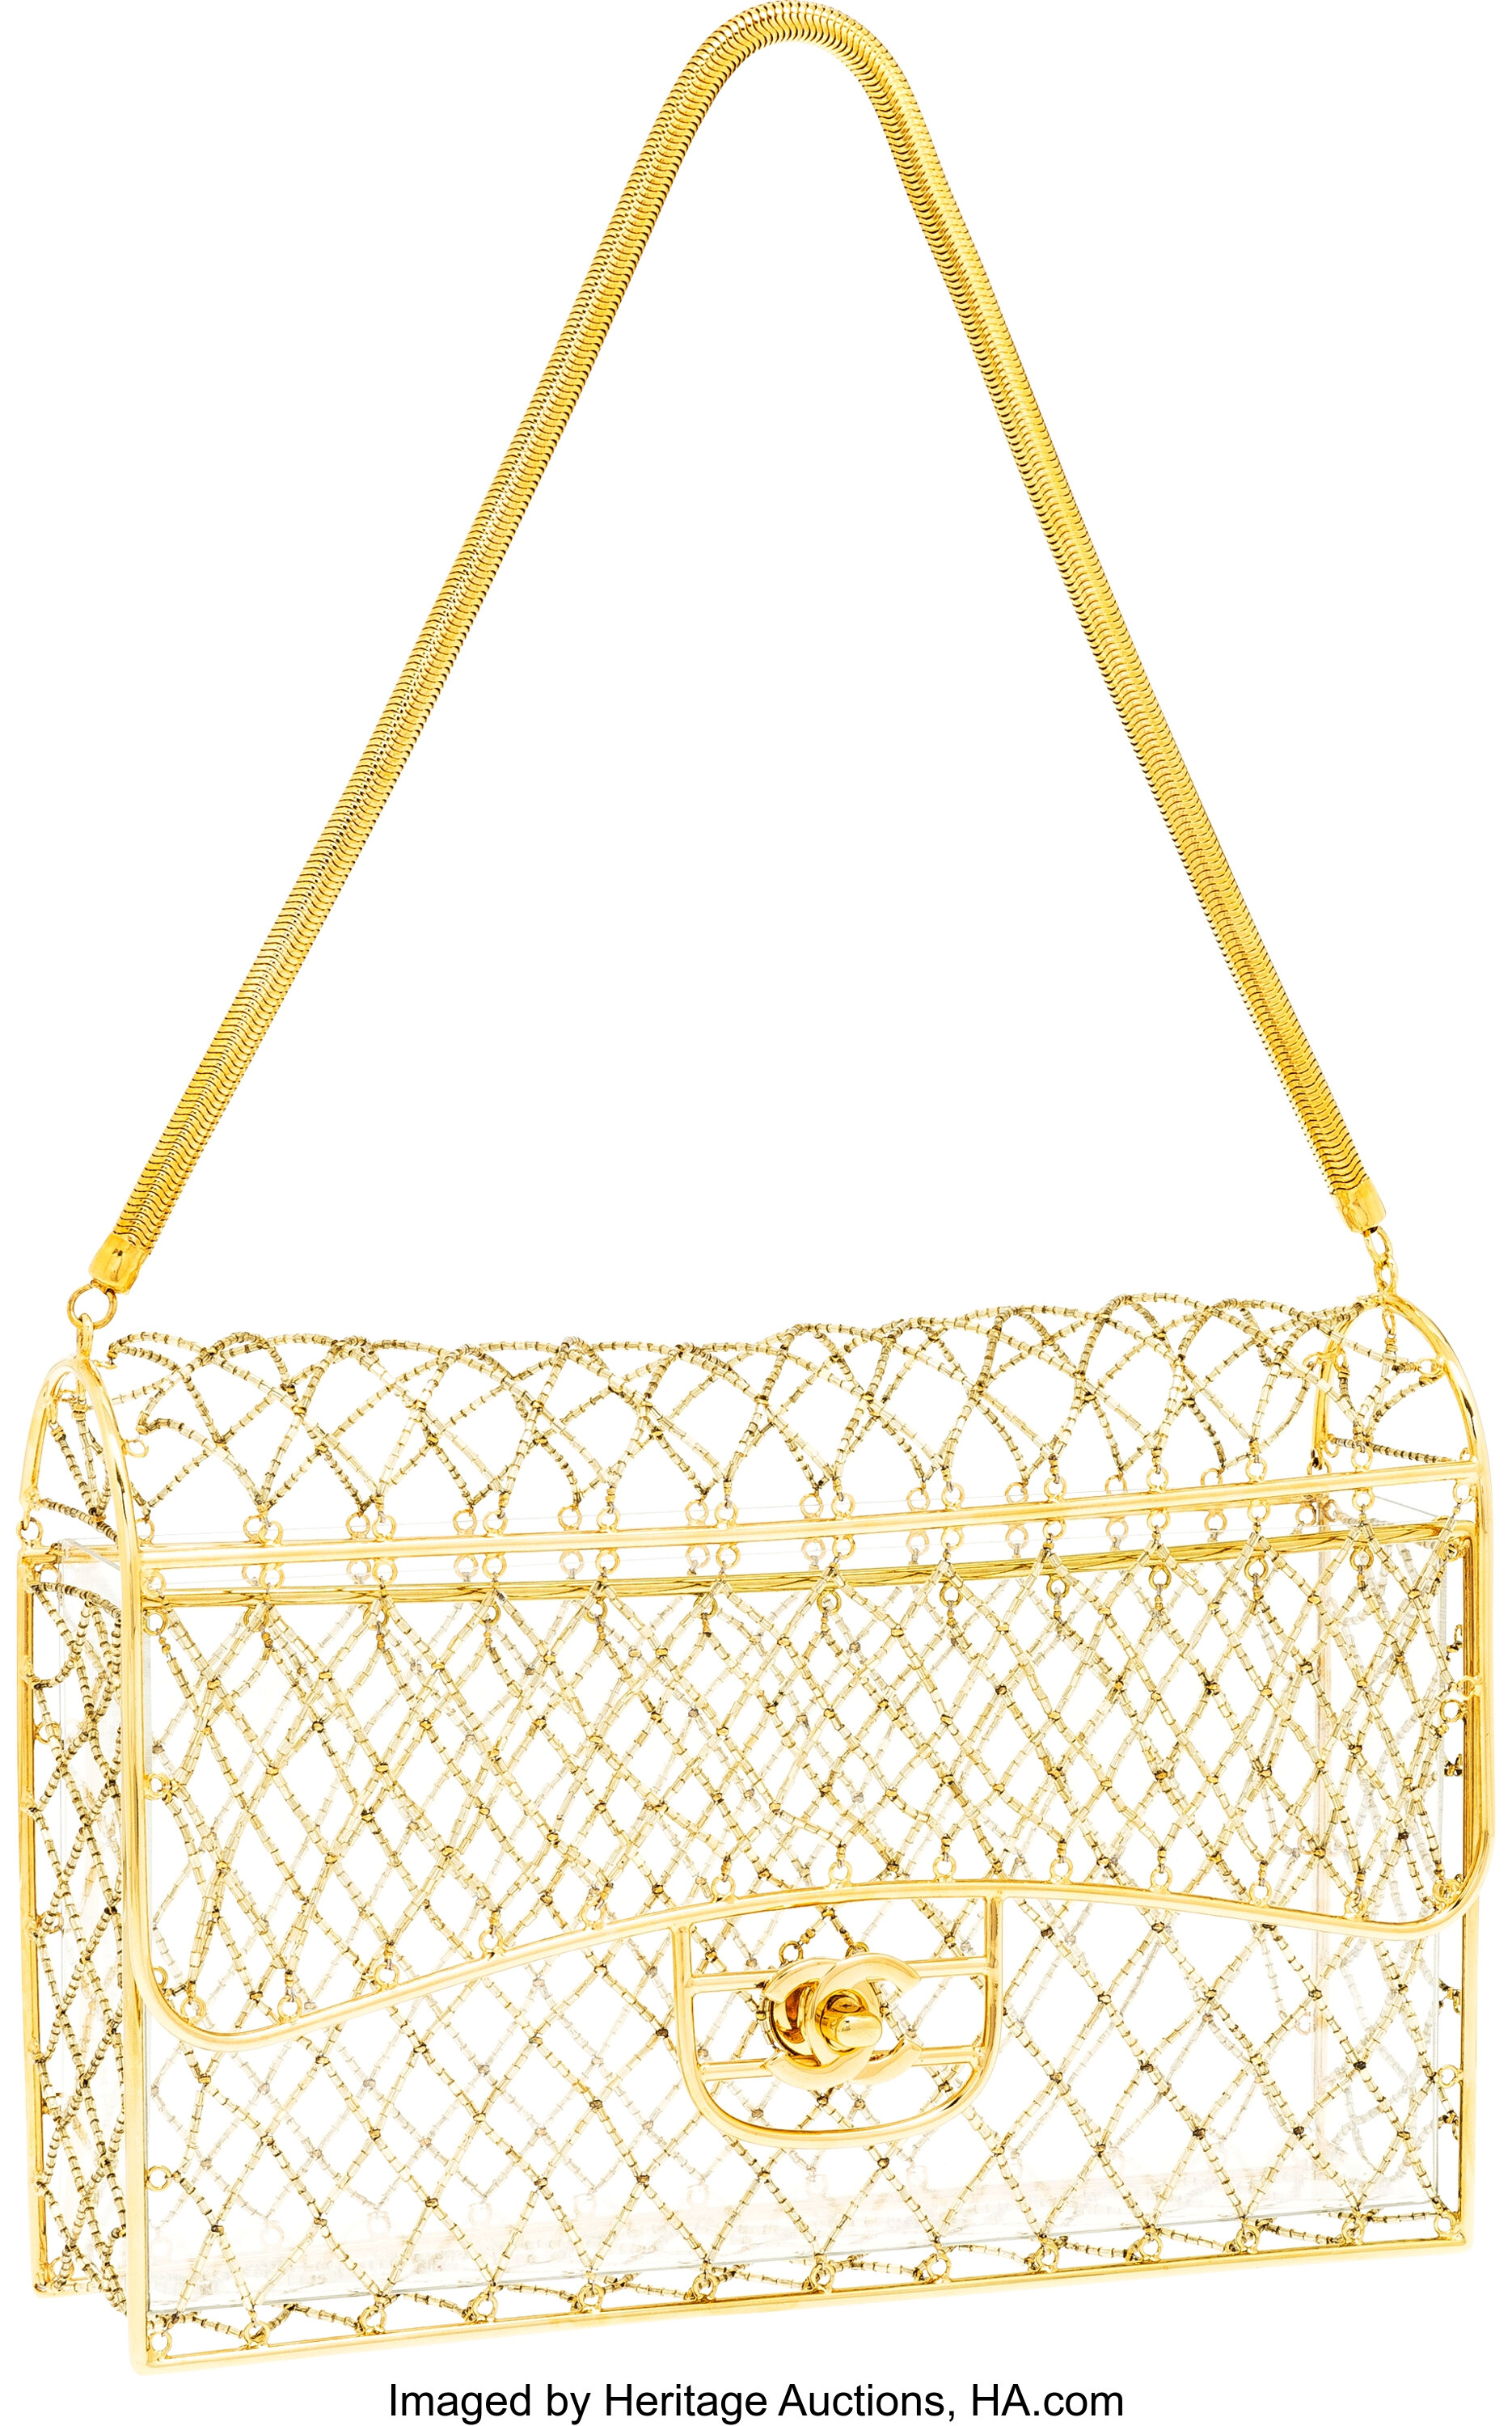 Chanel Gold Cage Beaded Medium Flap Bag with Gold Hardware . Very